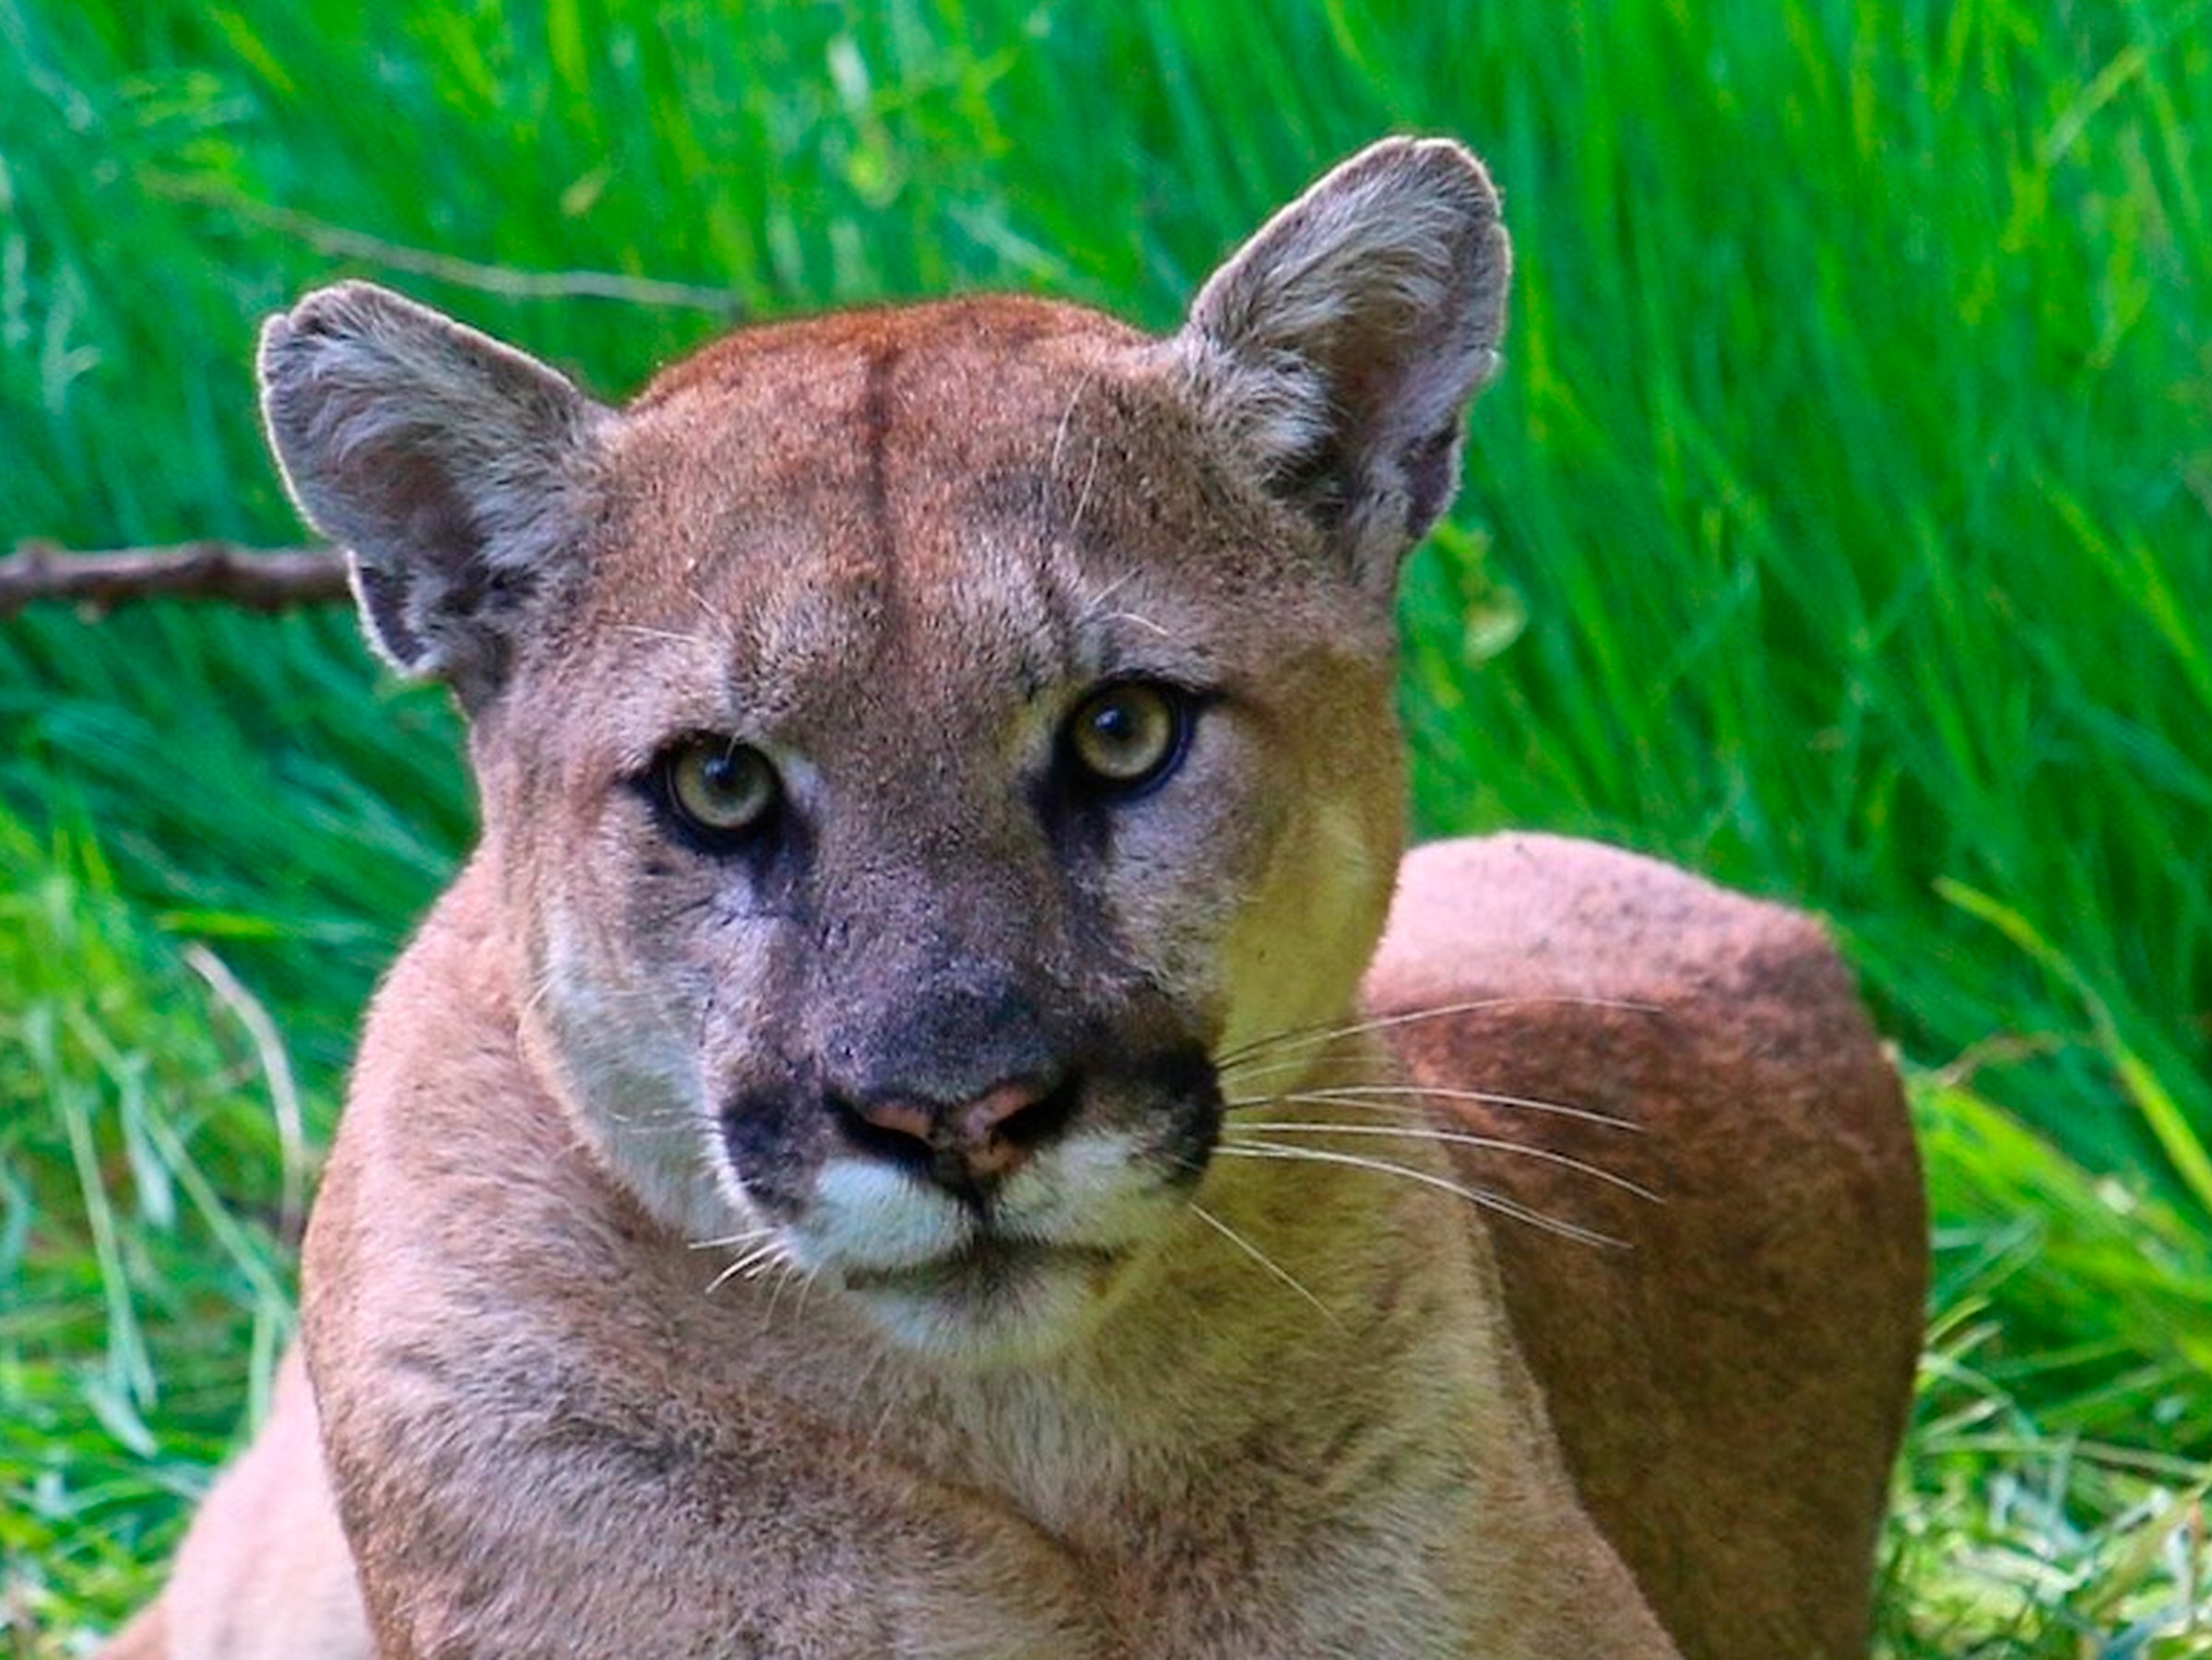 A boy miraculously escaped with minor injuries after a cougar confrontation in Washington state